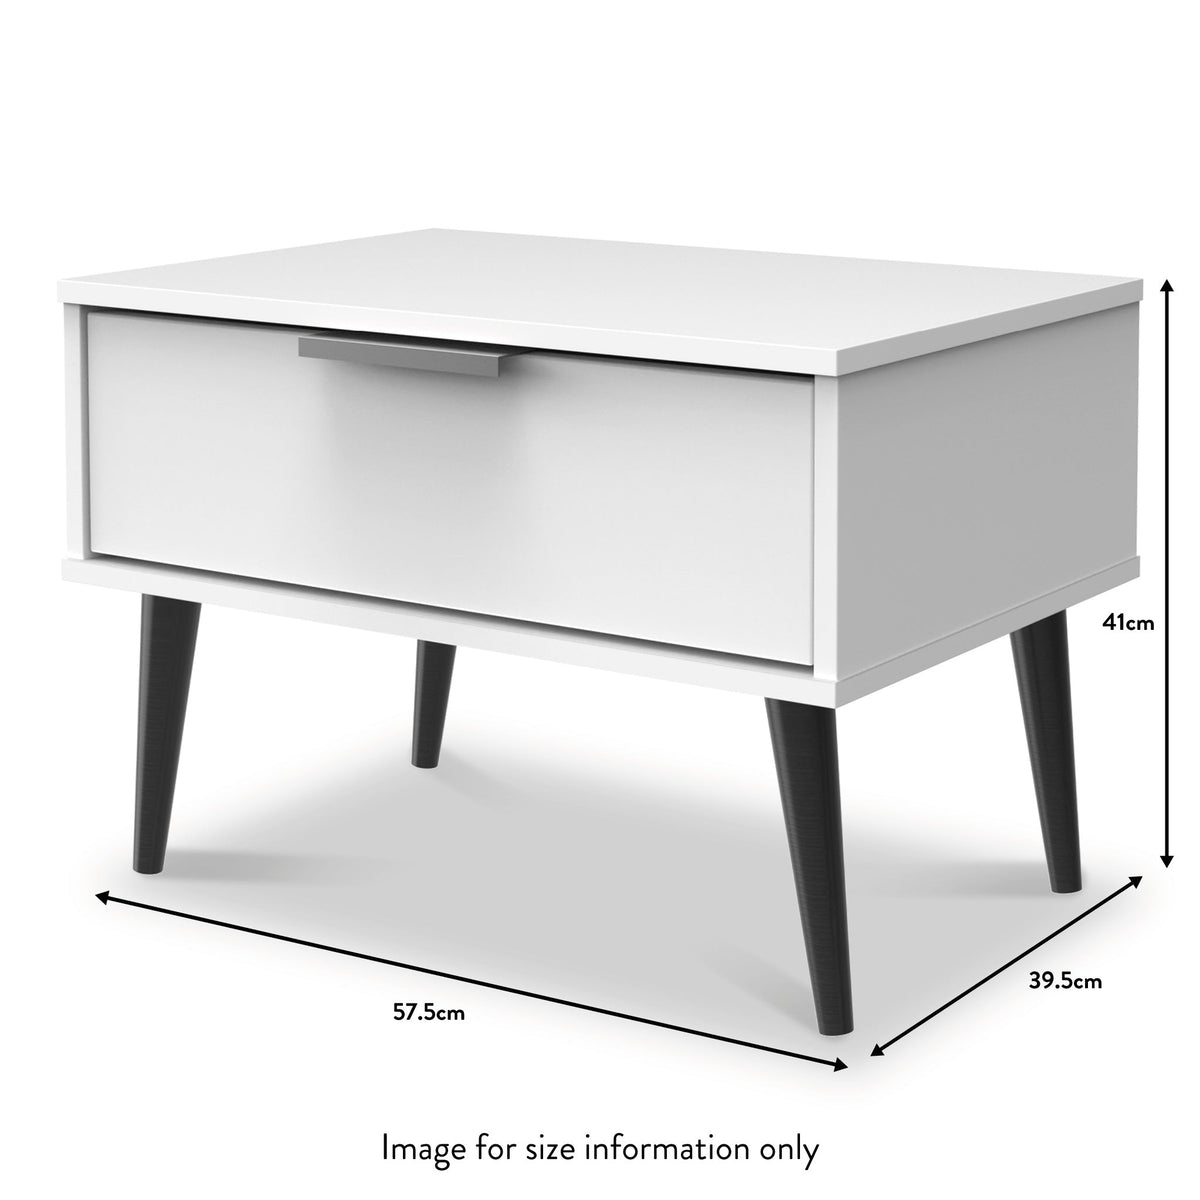 Asher White 1 Drawer Lamp Side Table dimensions